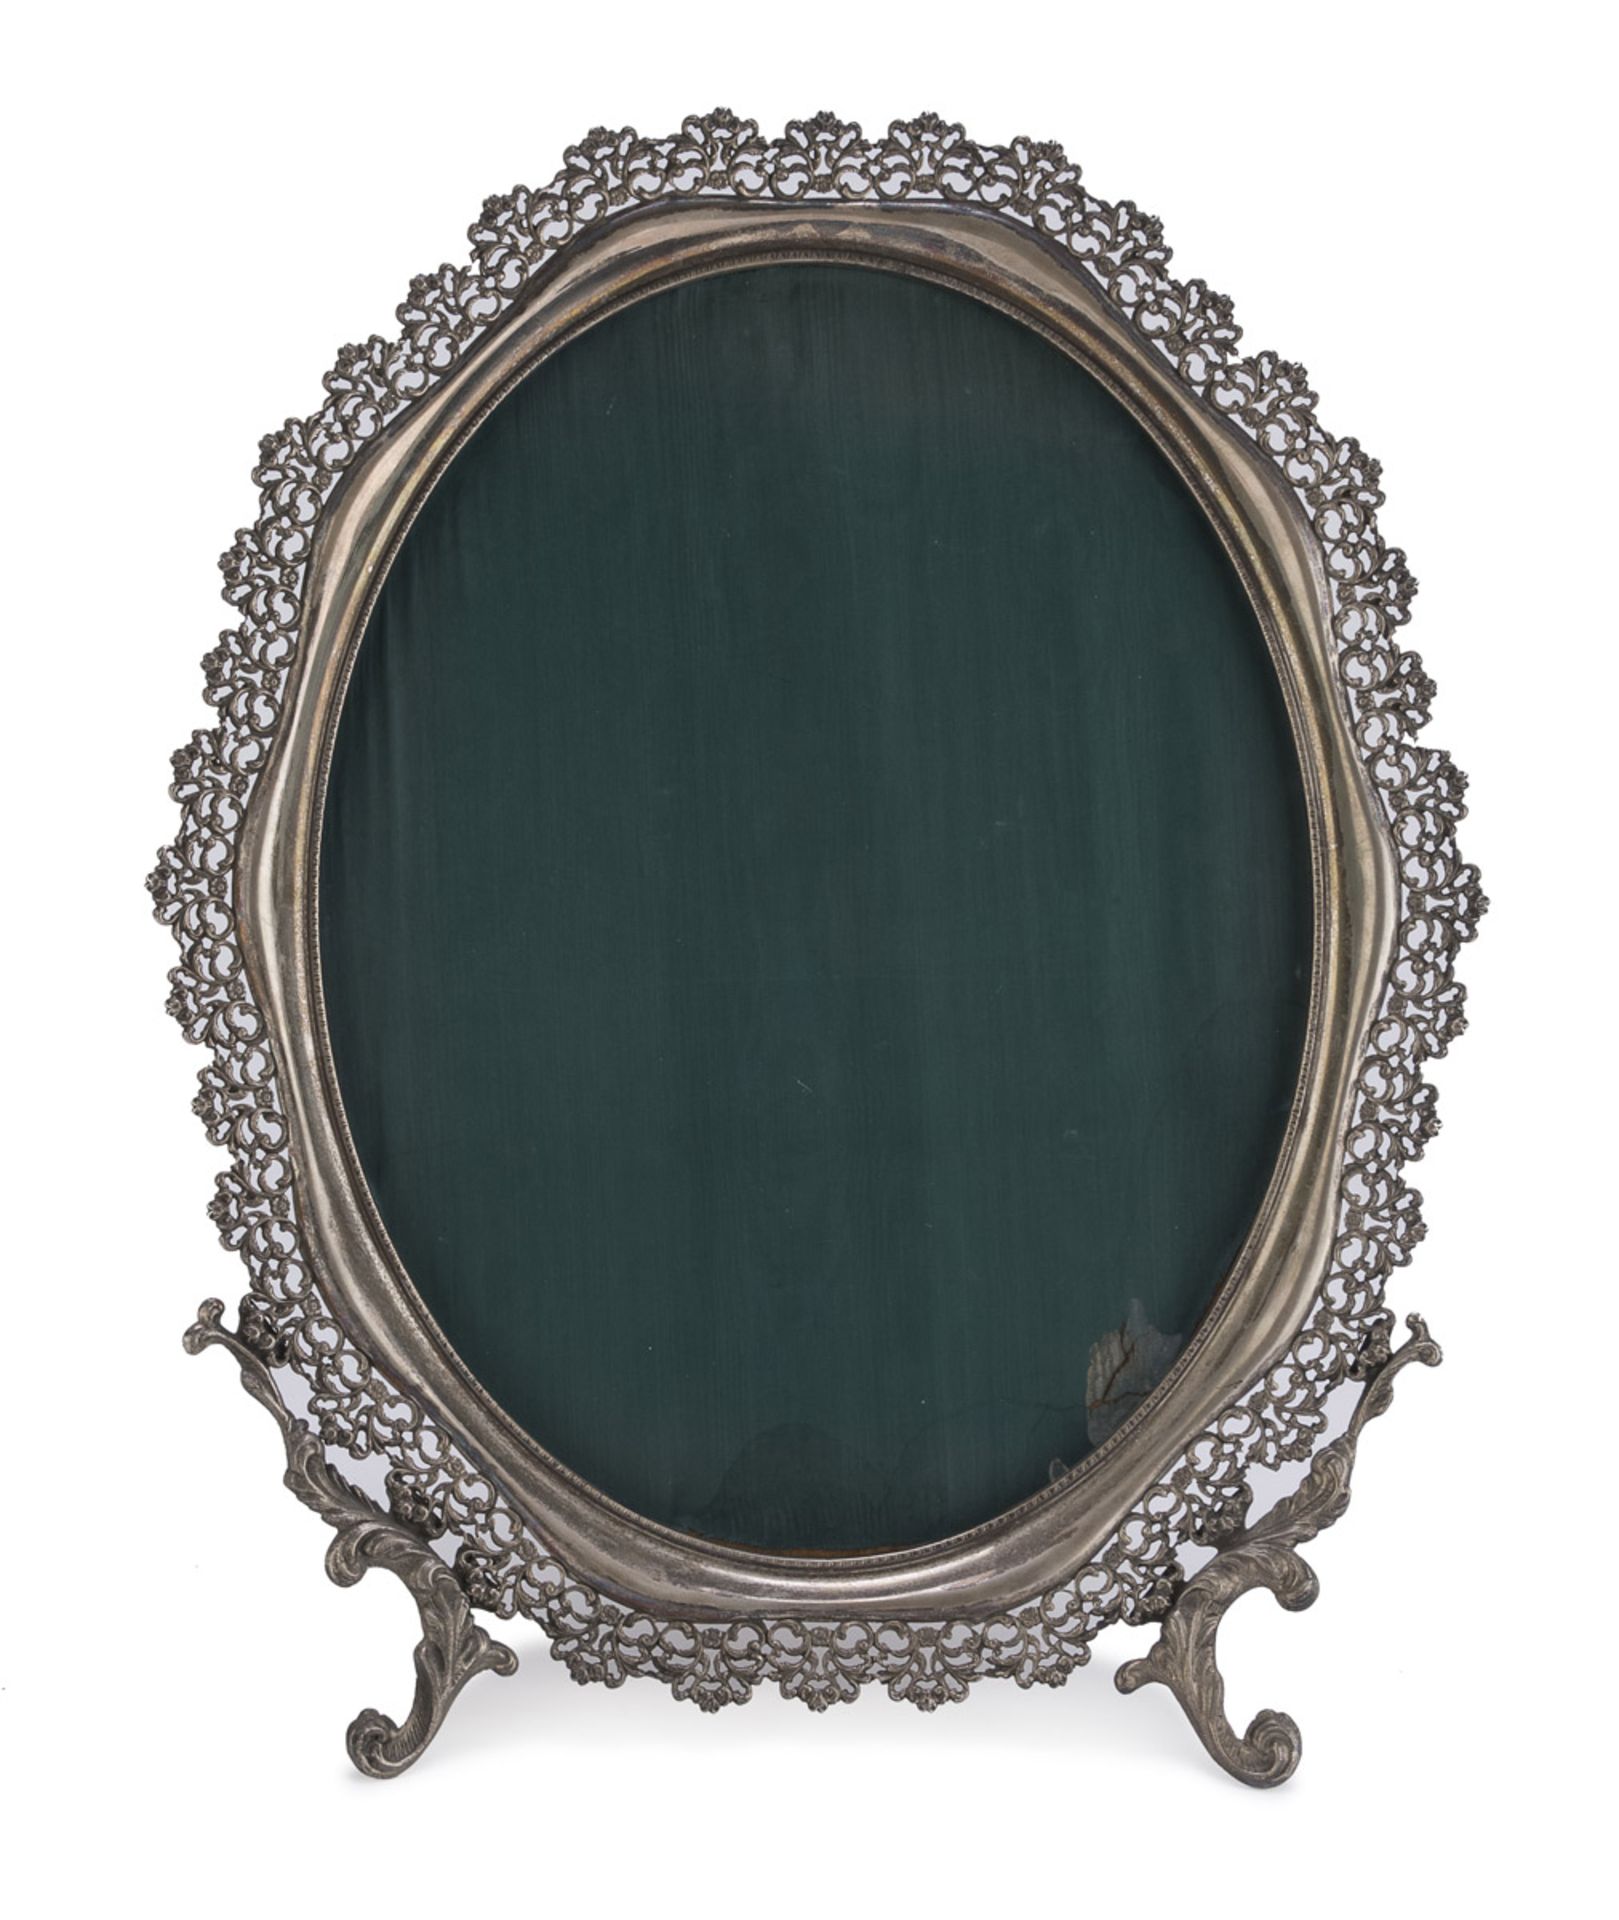 TABLE FRAME IN SILVER - EARLY 20TH CENTURY